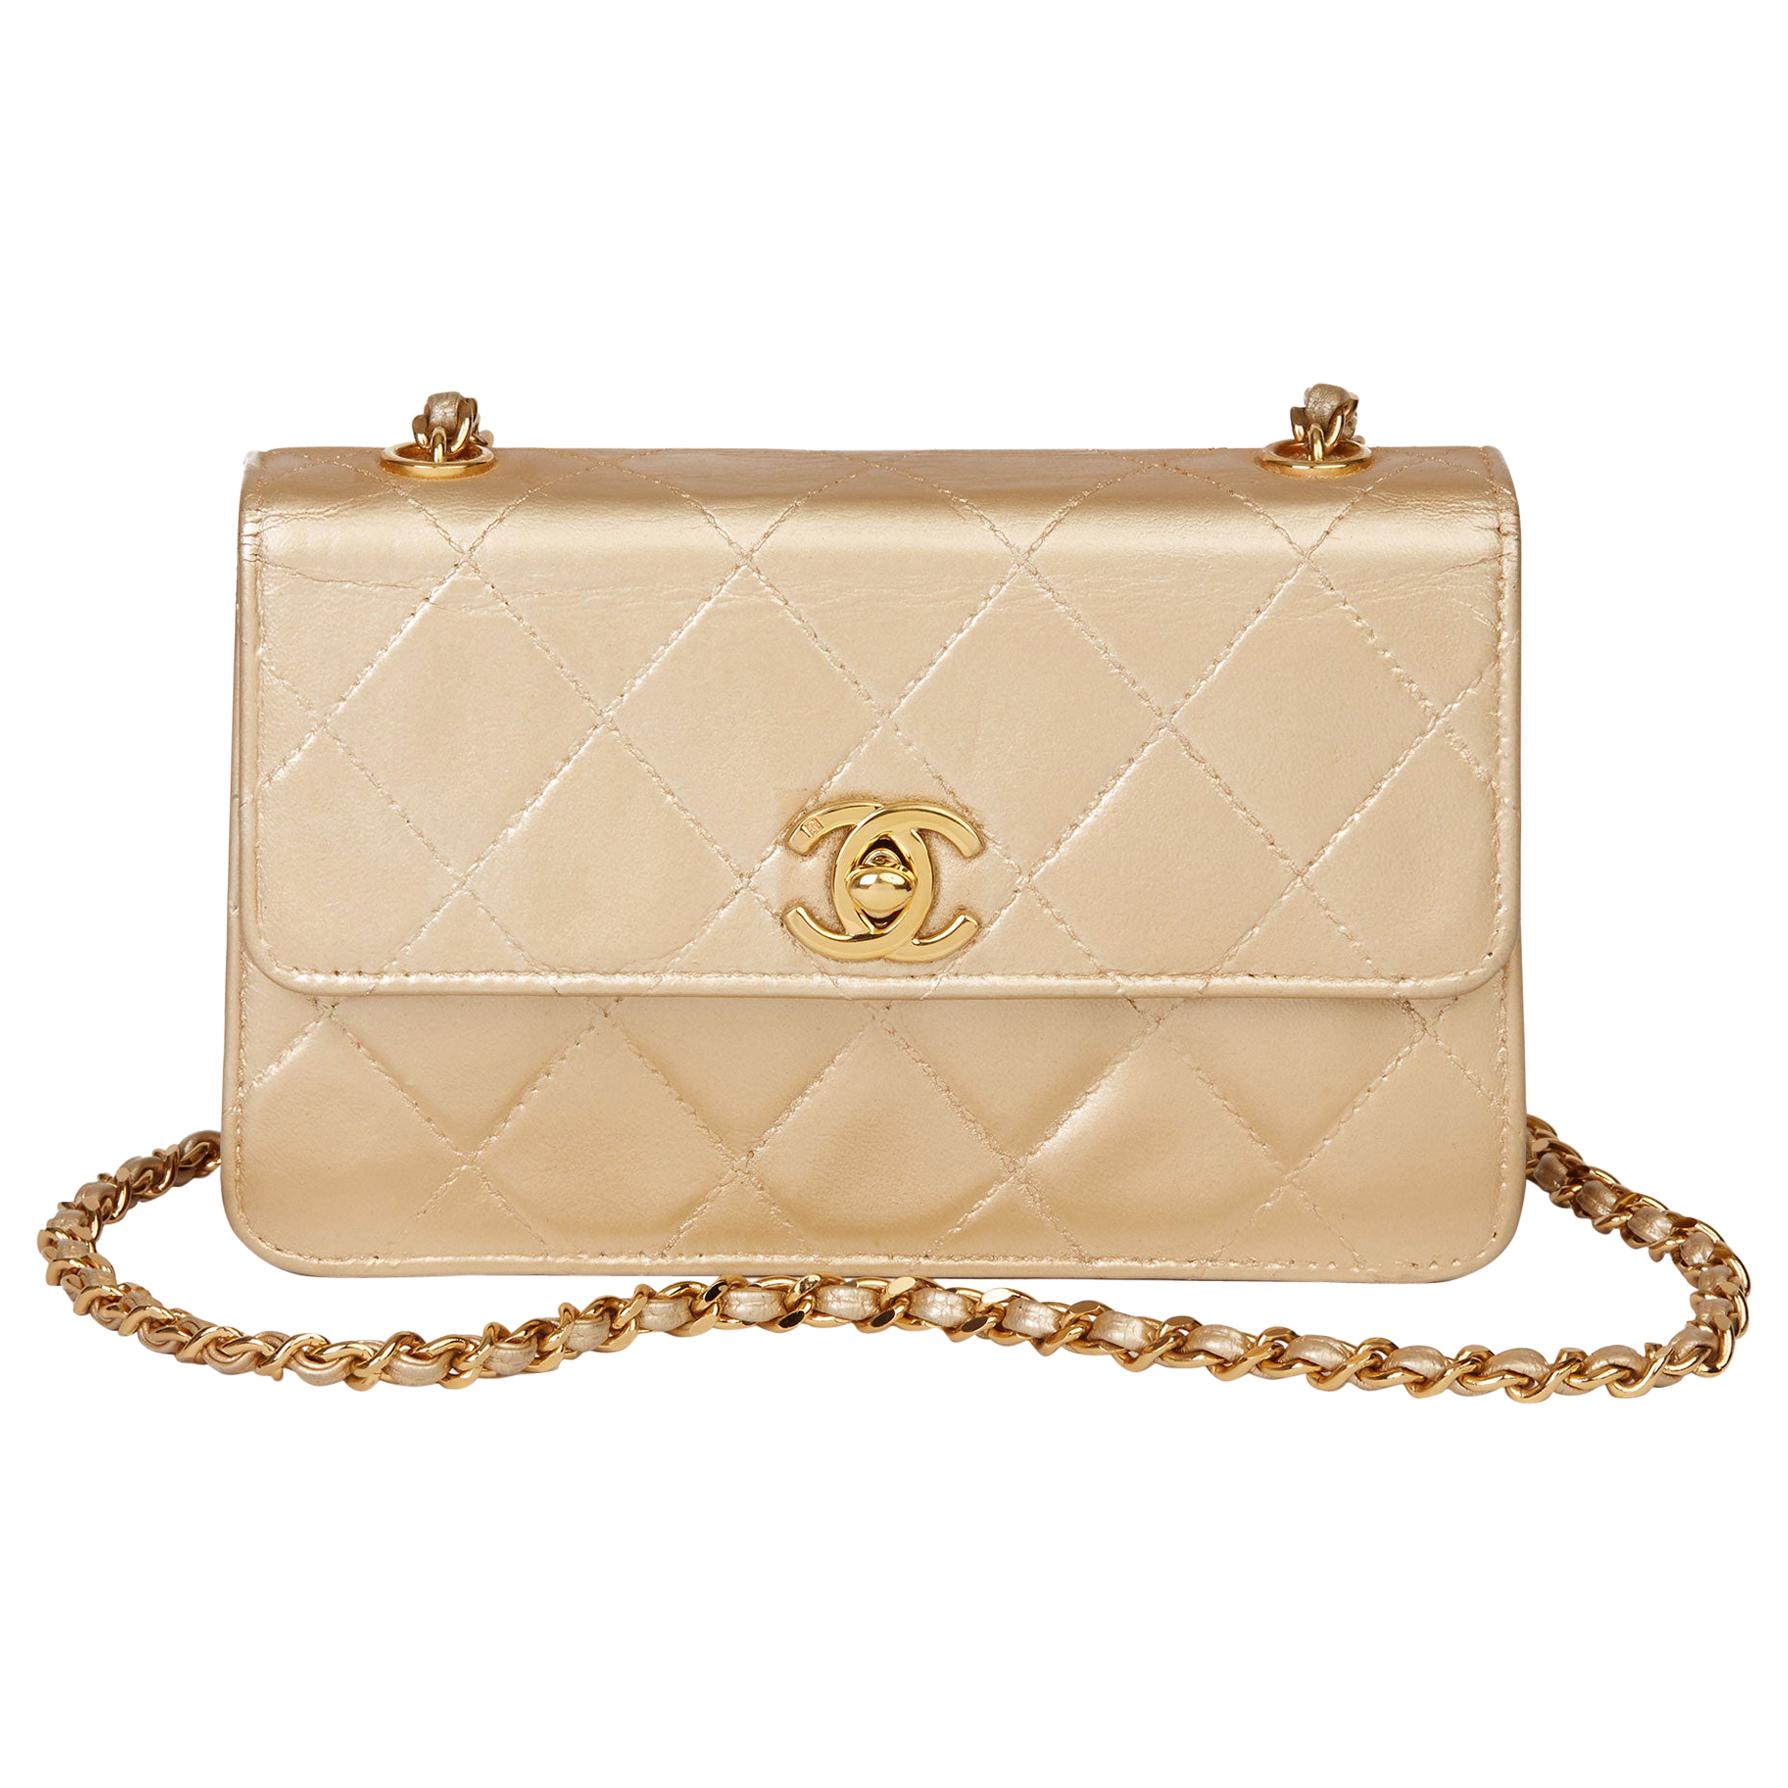 1996 Chanel Gold Quilted Metallic Lambskin Vintage Mini Flap Bag